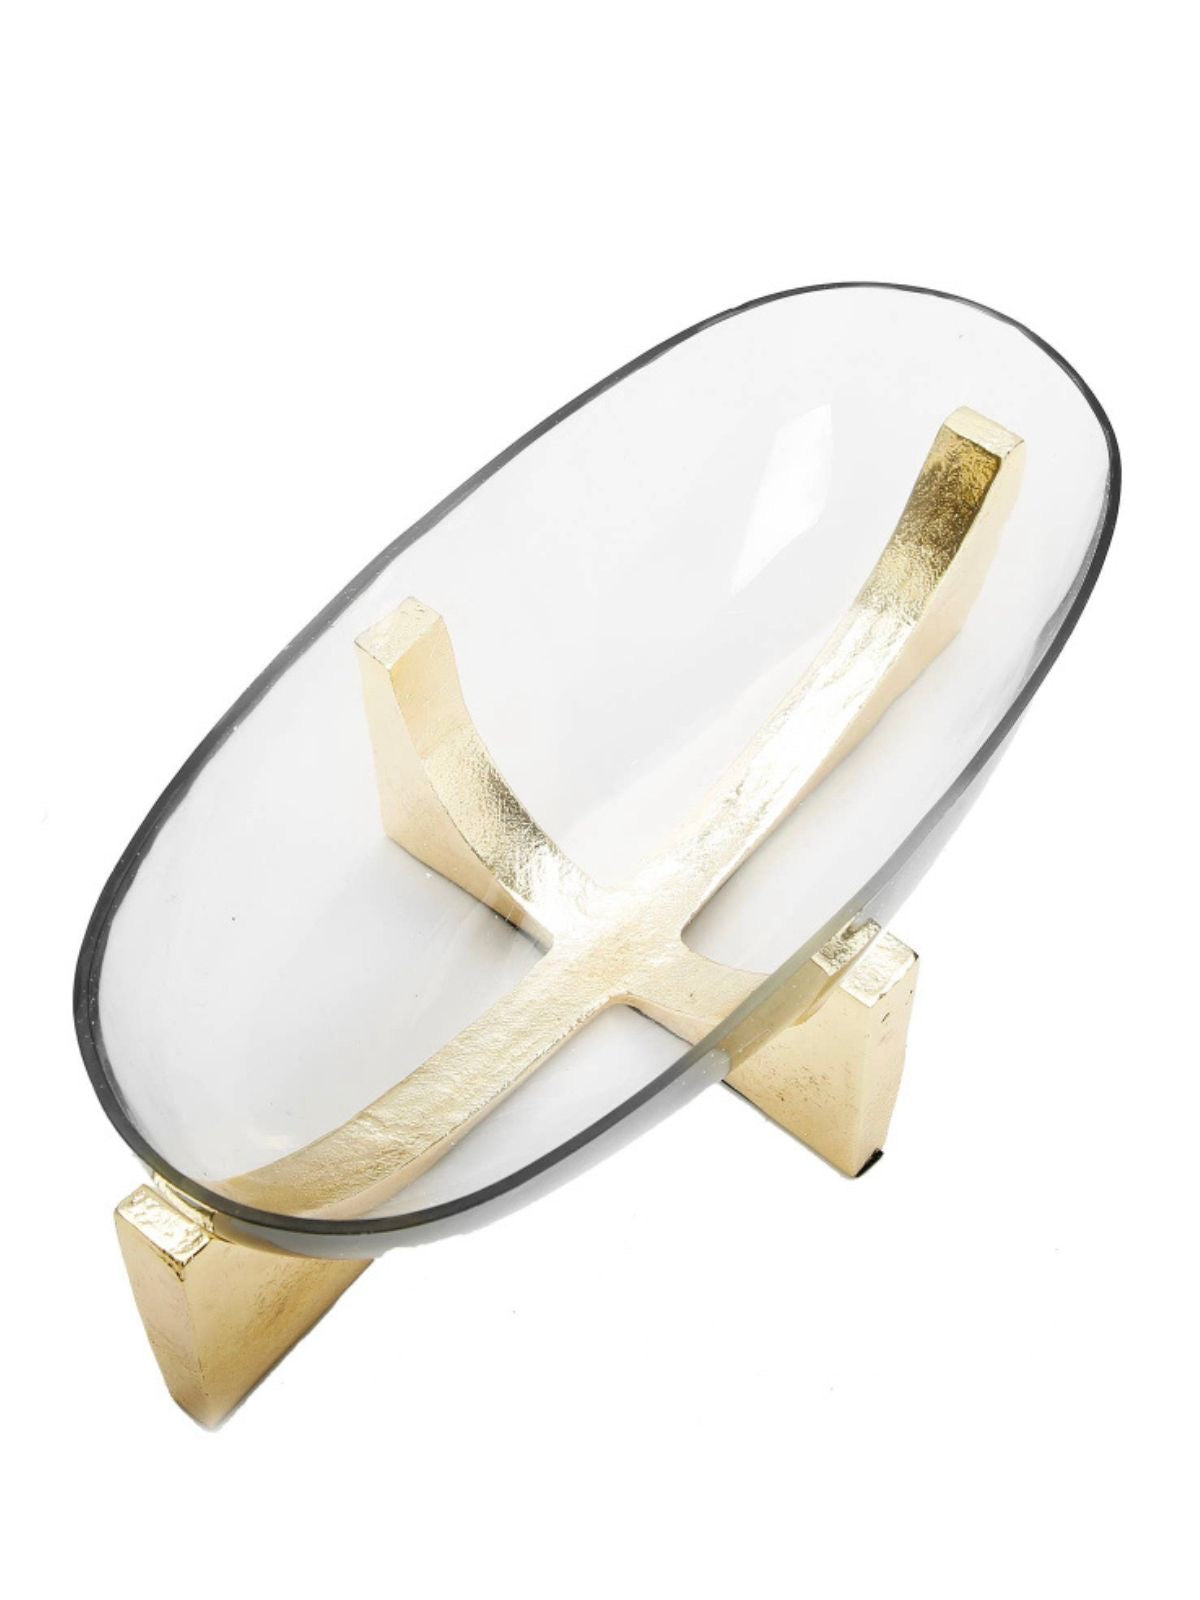 12L x 5W Glass Oval Bowl On Gold Stainless Steel Block Base Top View.